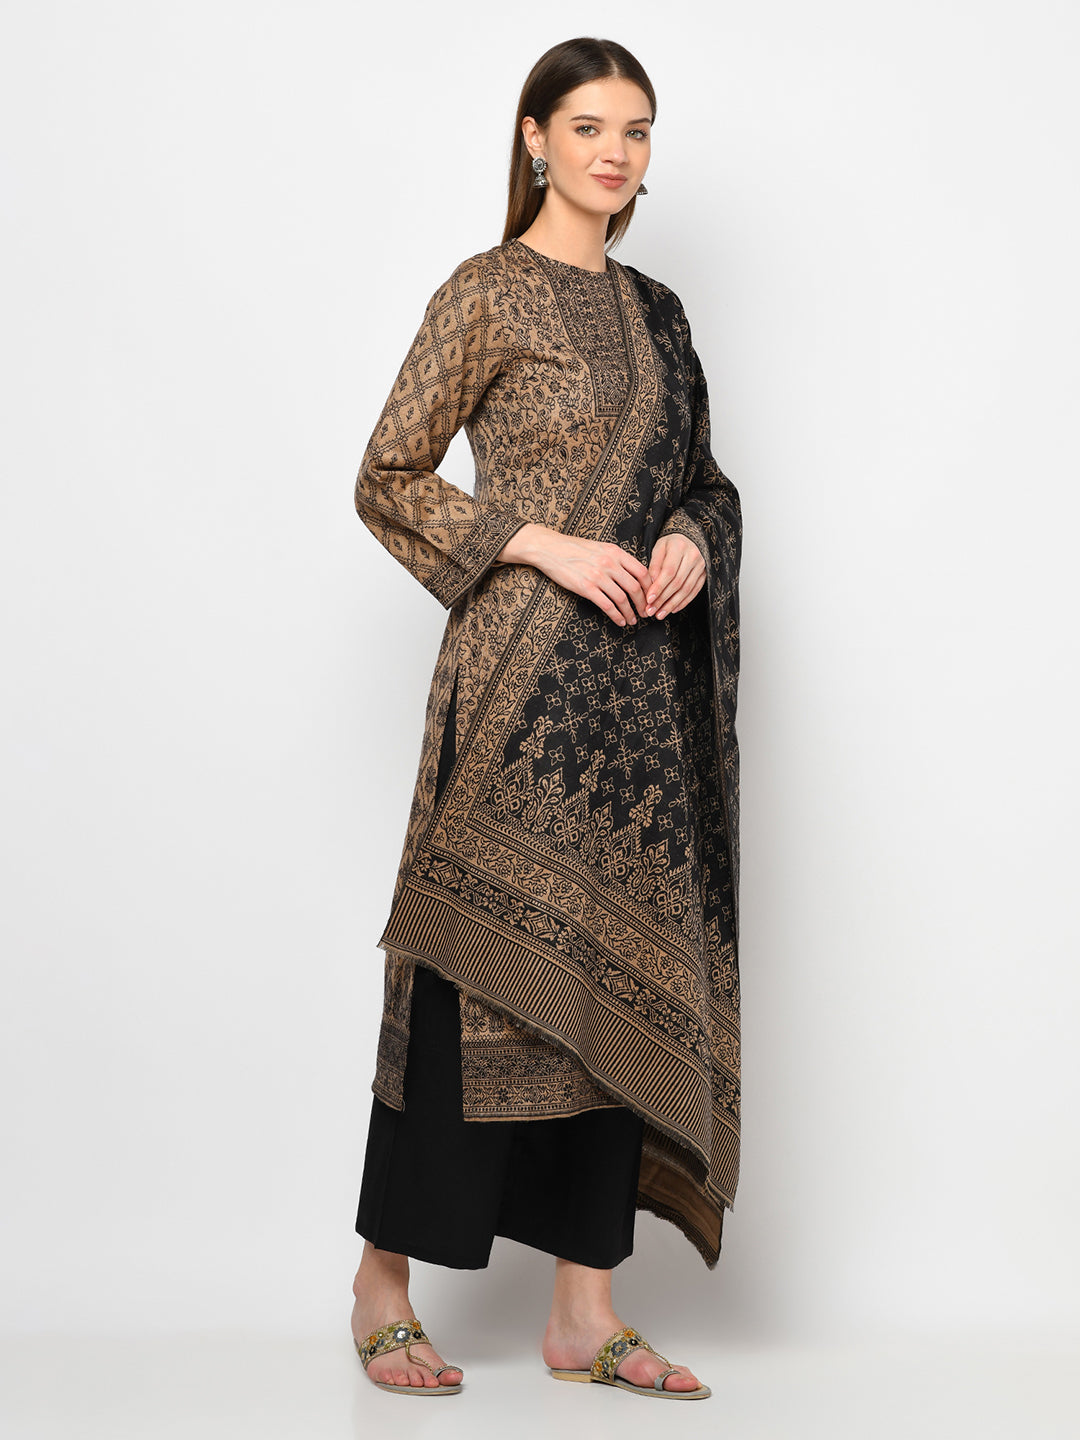 Acro Wool Camel Dress Material with Stole